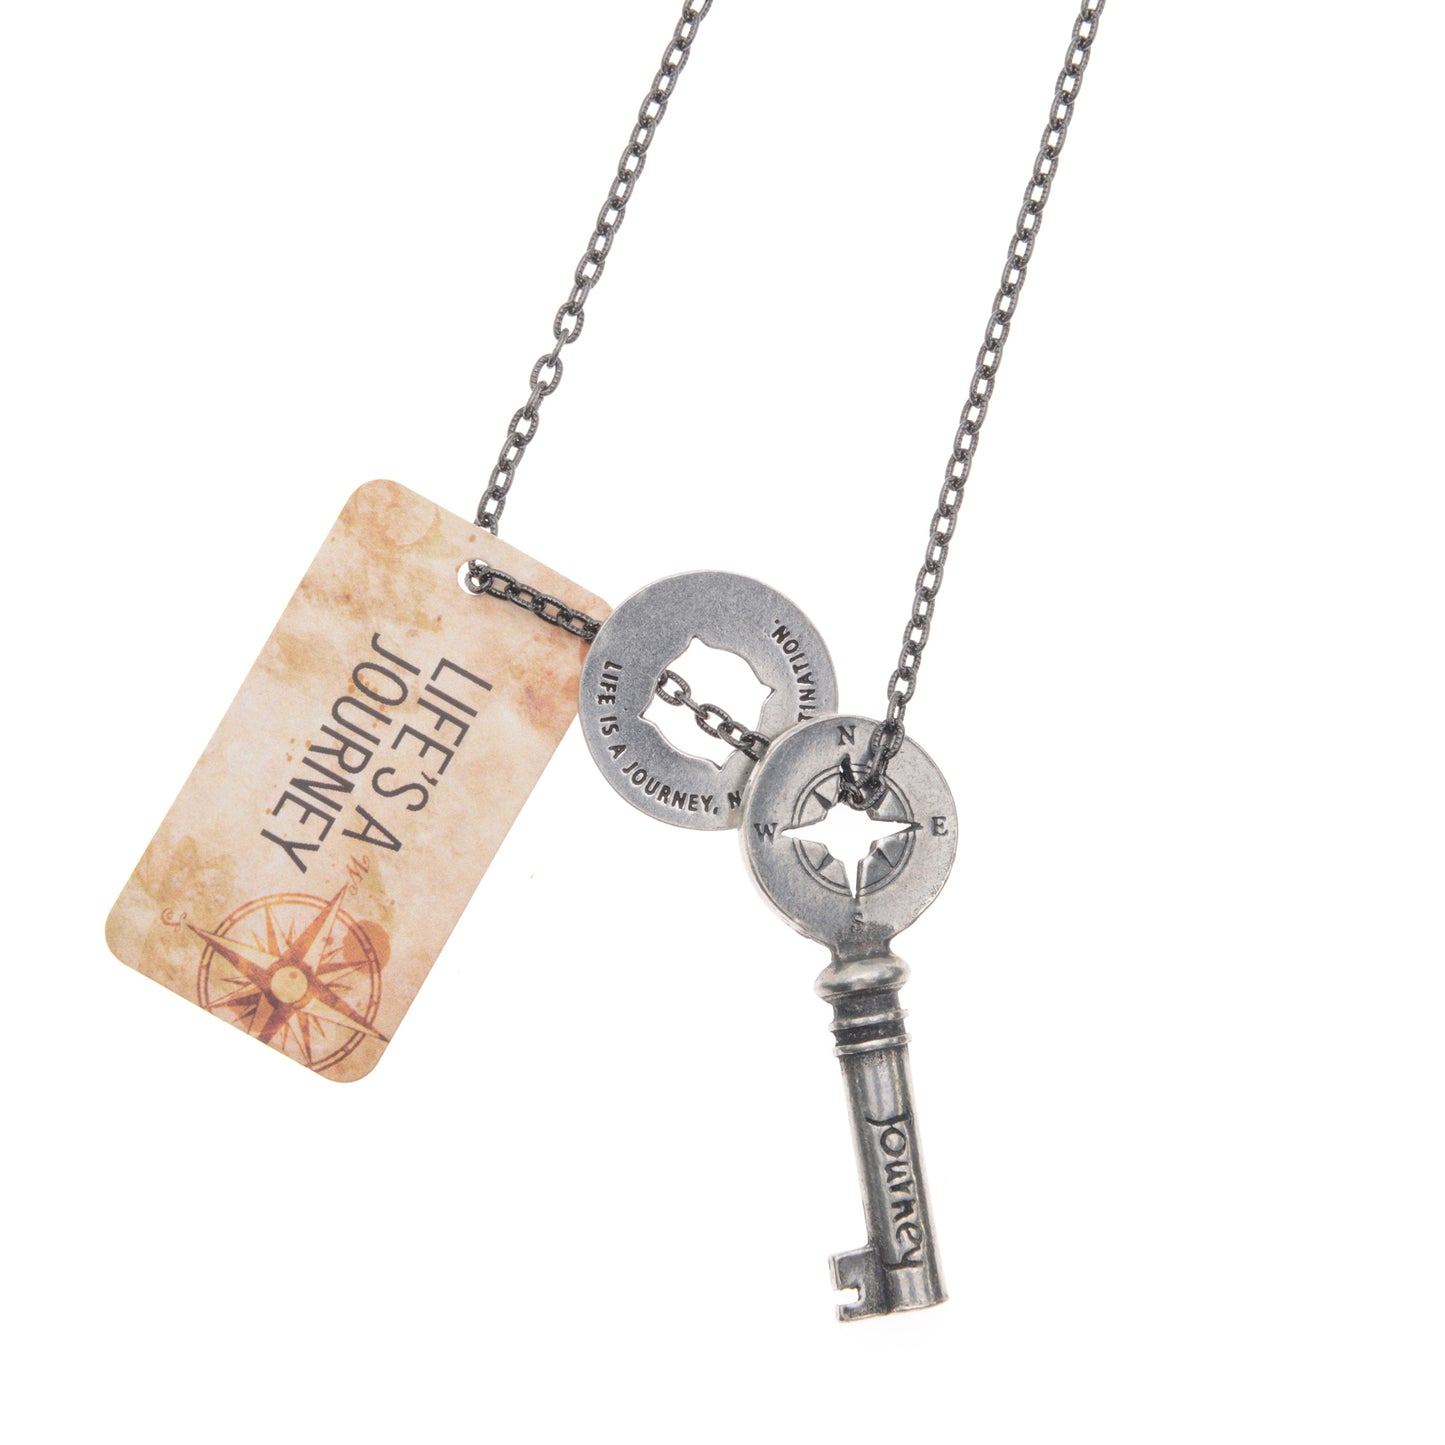 Journey Key Charm on ball chain with backer card